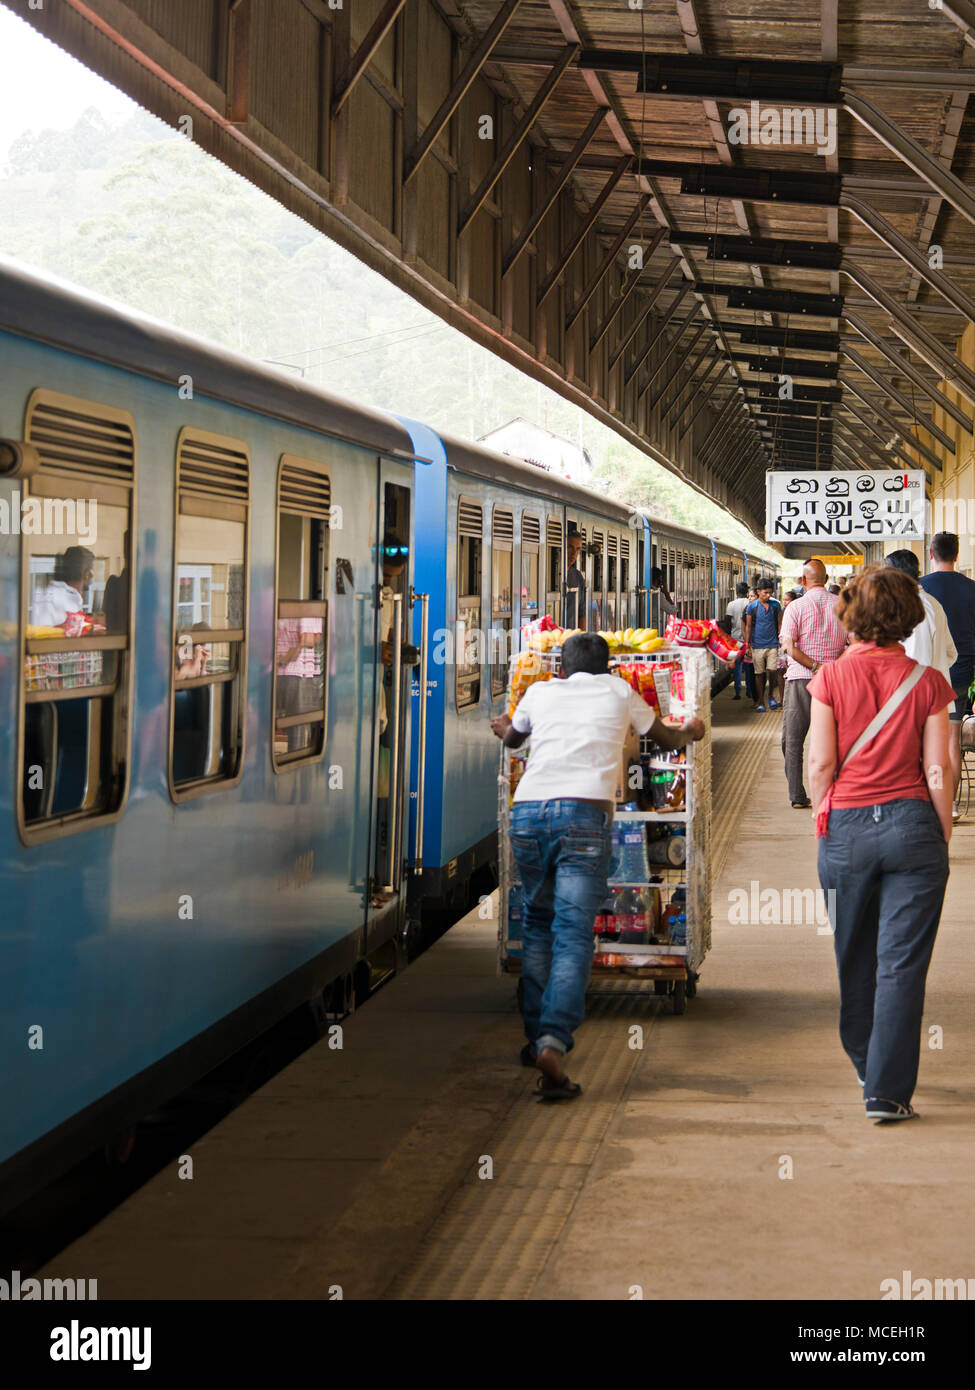 Vertical view of people at Nanu-oya Train Station in the highlands of Sri Lanka. Stock Photo